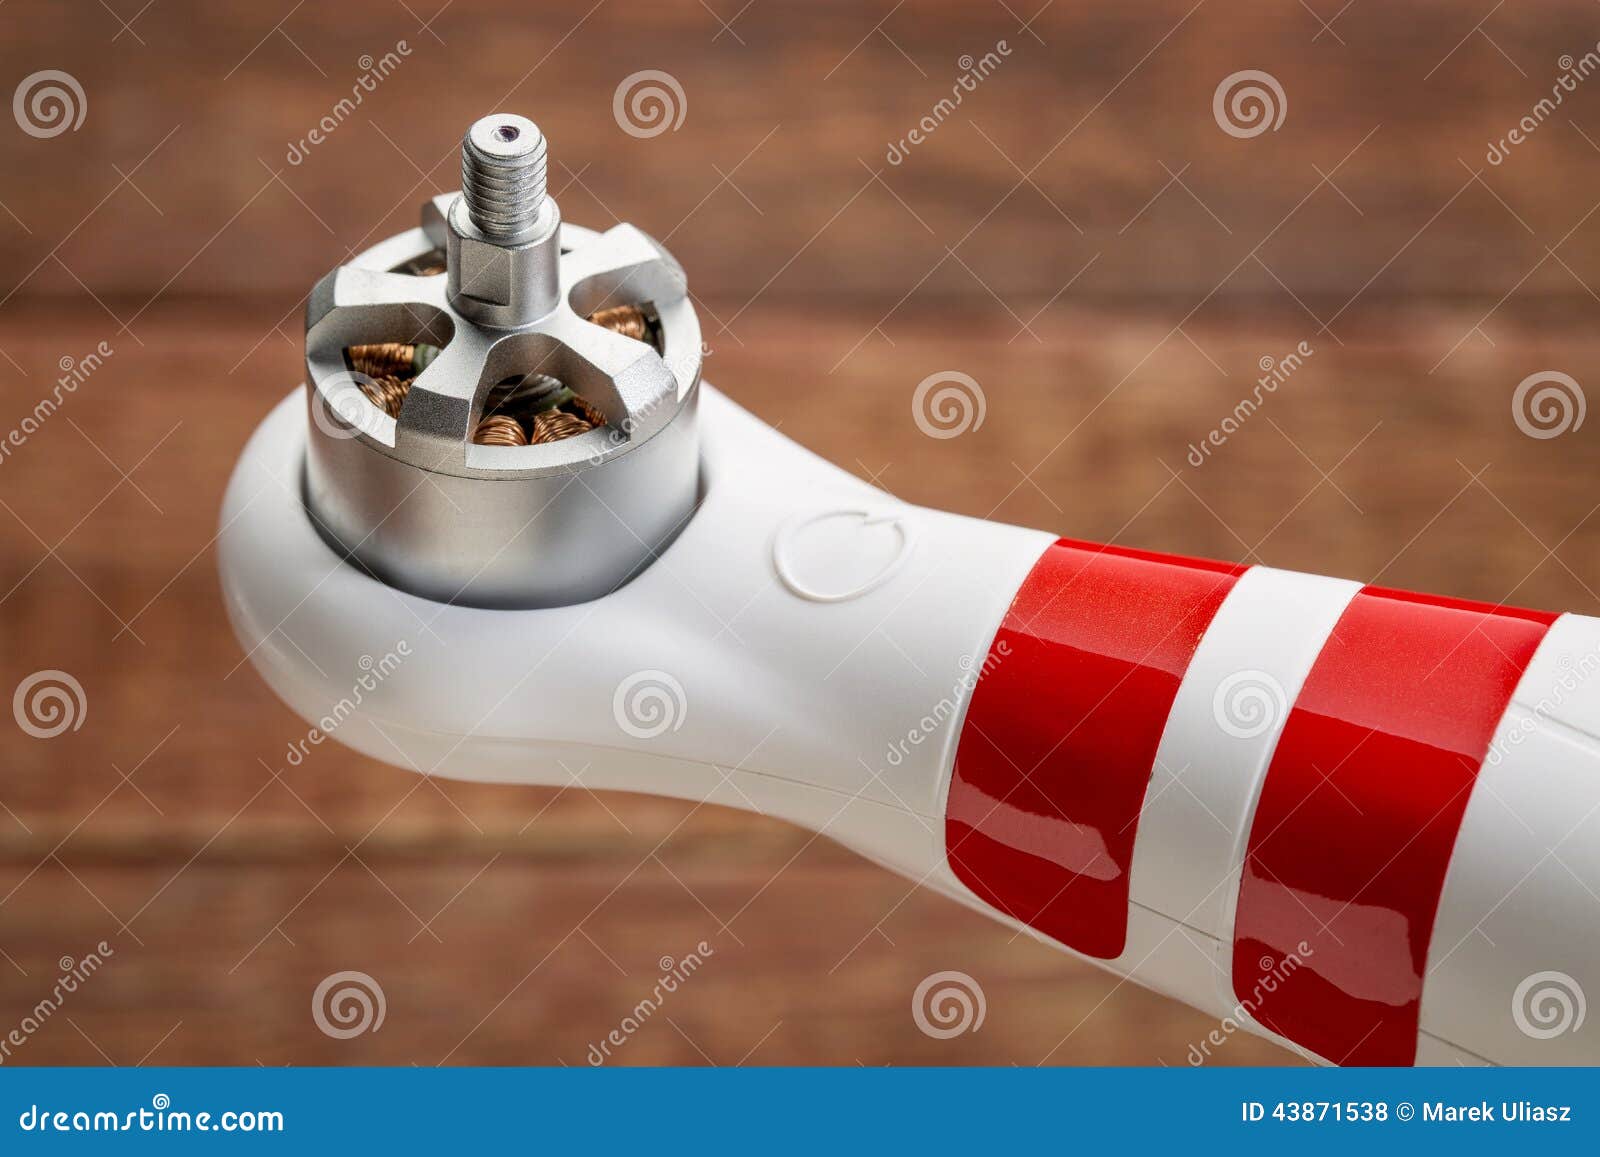 Quadcopter drone motor stock photo. Image of helicopter ...